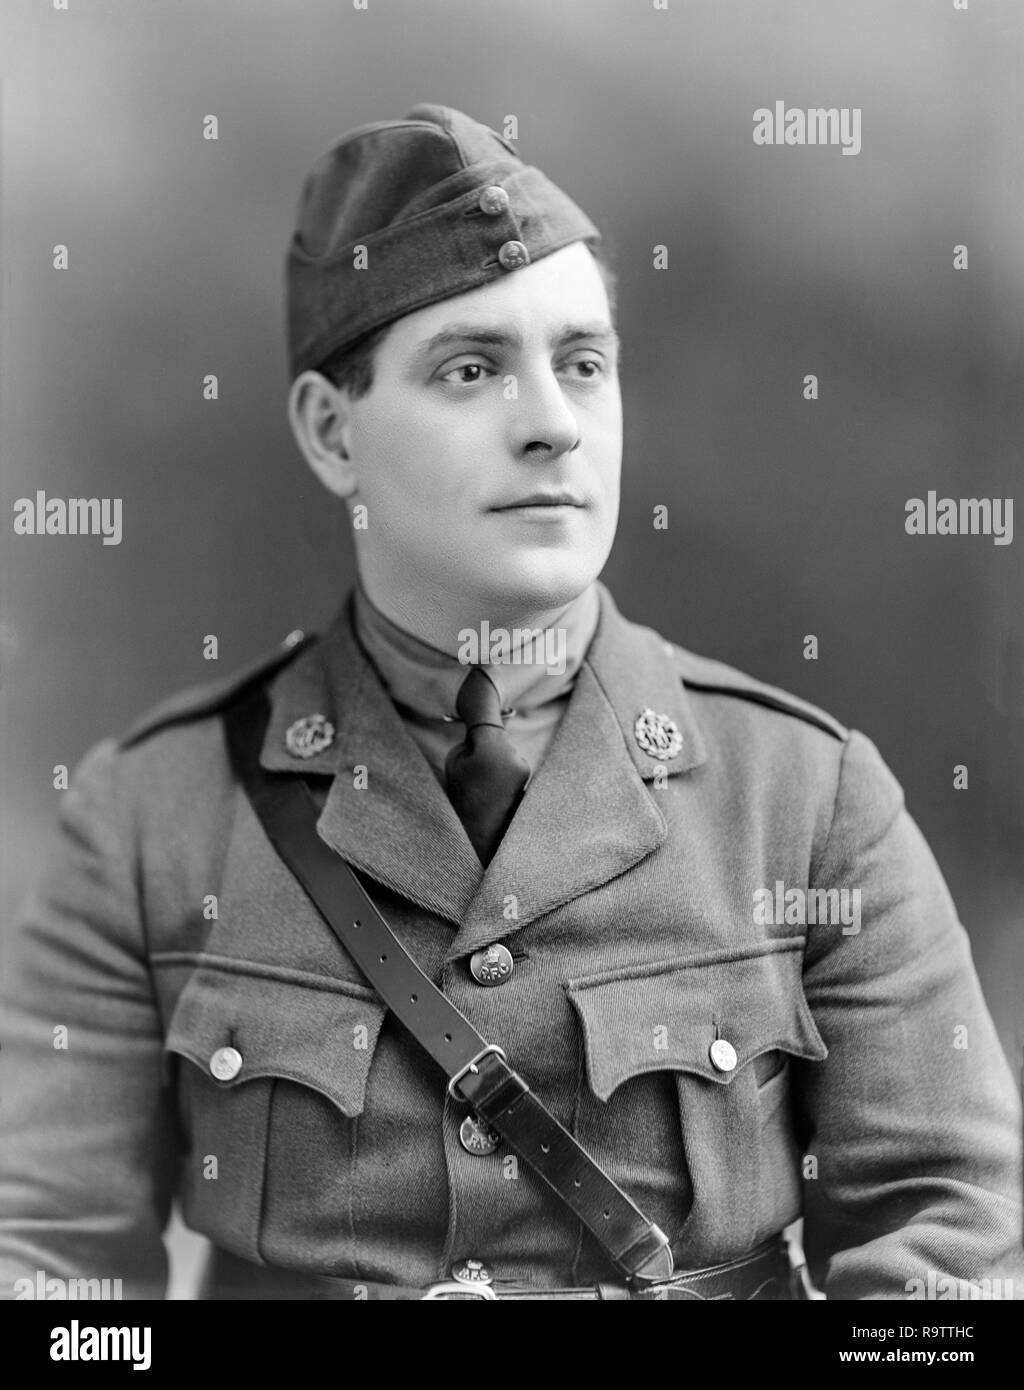 2nd Lieutenant J. Wingate of the Royal Flying Corps. Photograph taken on 13th December 1916 at the famous London Studio photographers Bassano of London. Stock Photo